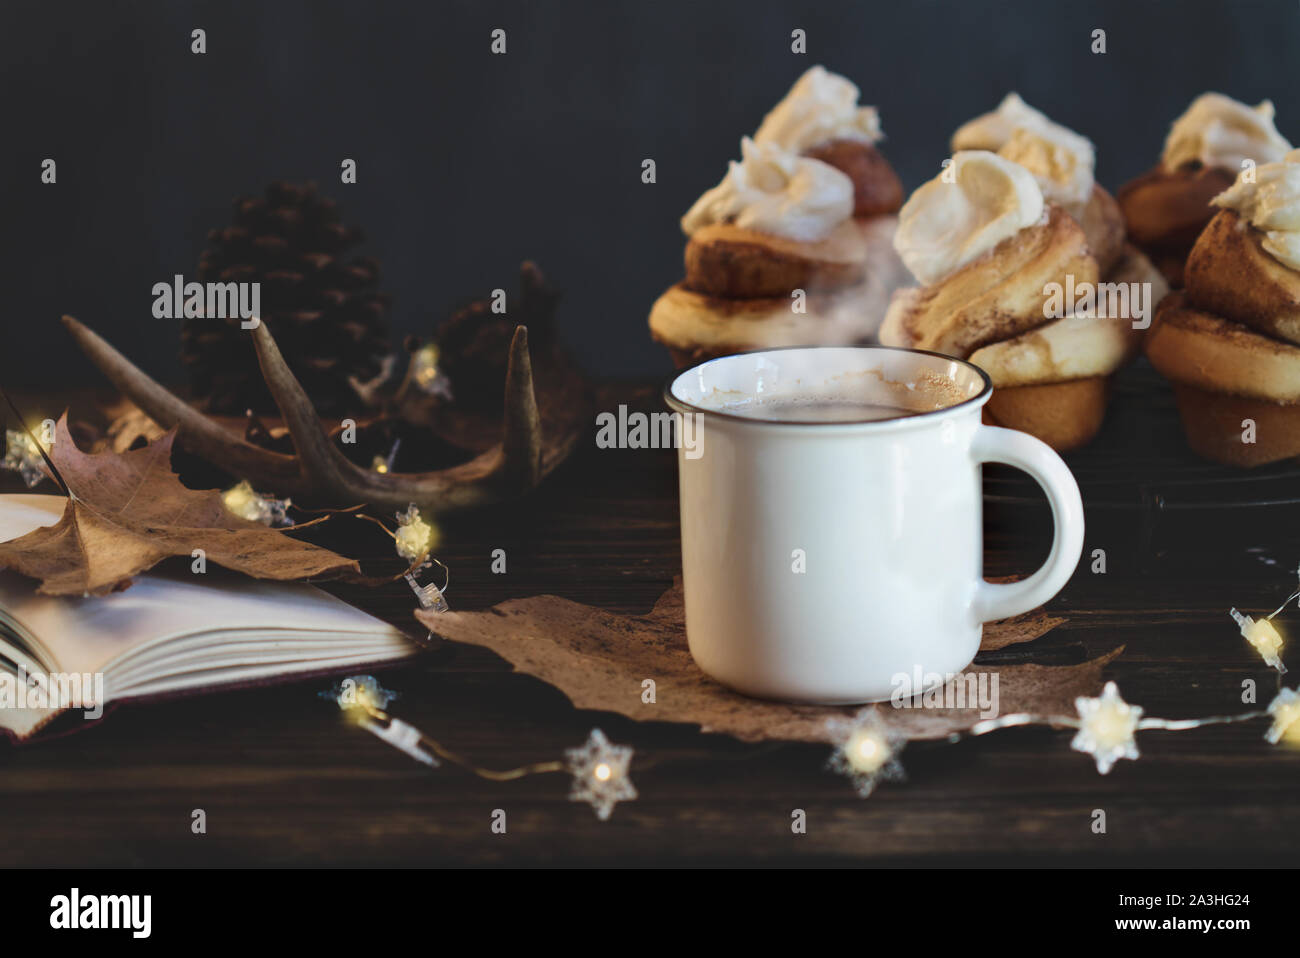 Hot, steaming cup of coffee with cinnamon rolls and open book Selective focus on drink with extreme blurred foreground and background. Stock Photo